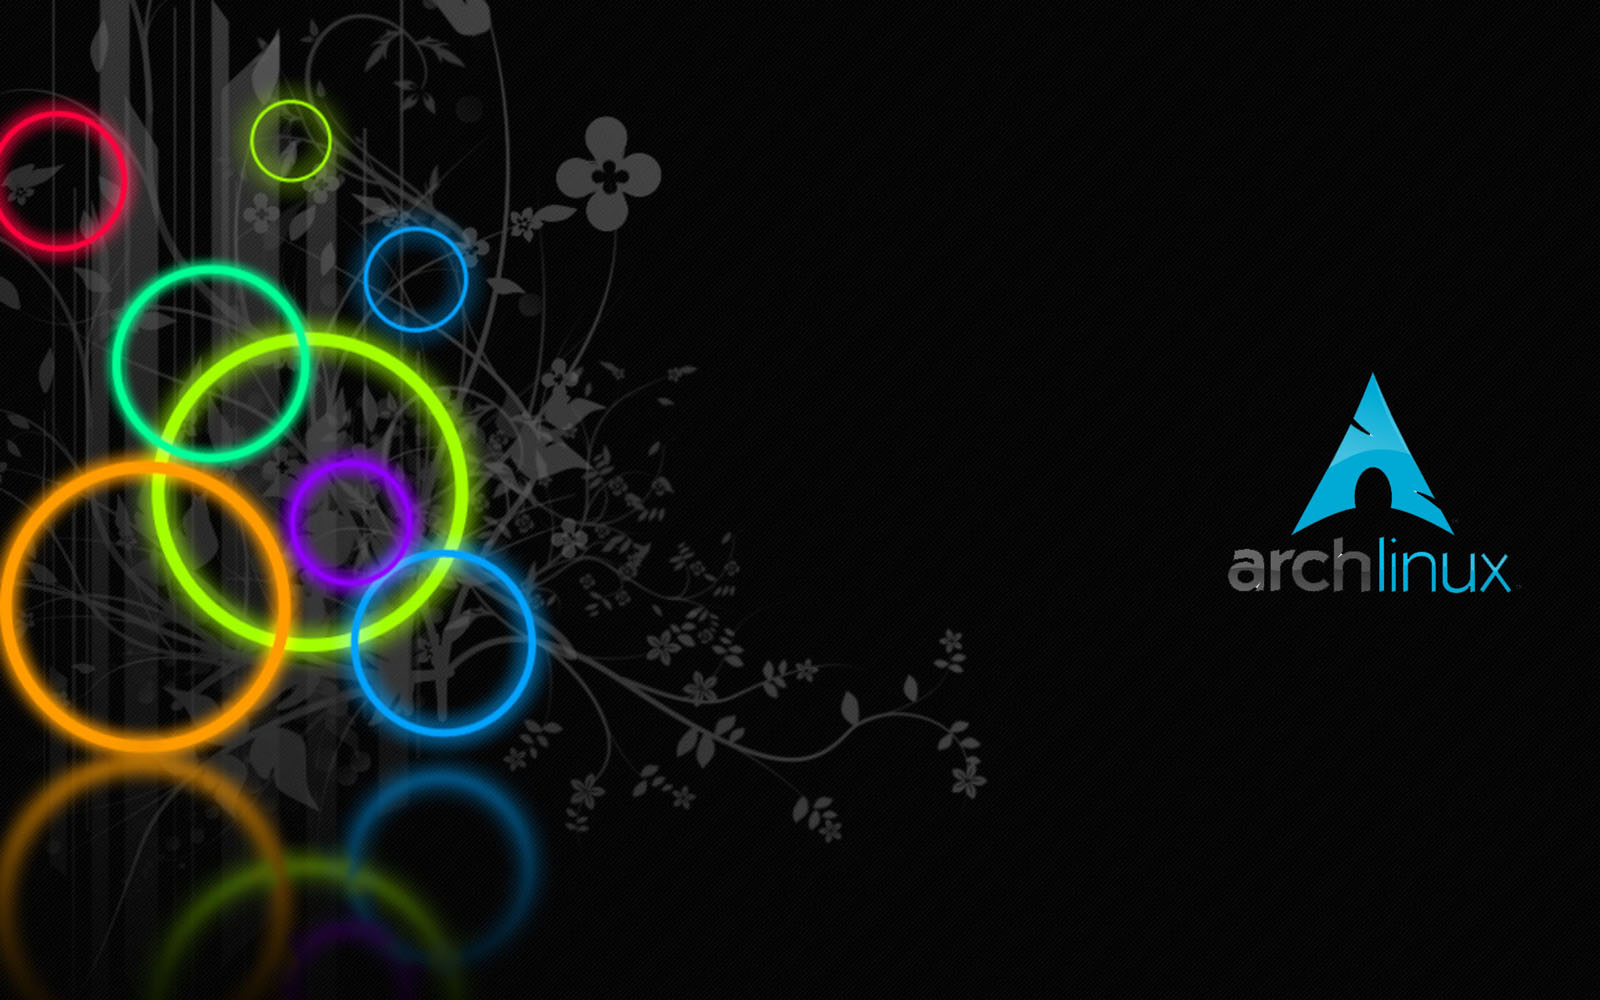  Arch Linux Wallpapers Arch Linux DesktopWallpapers Arch Linux